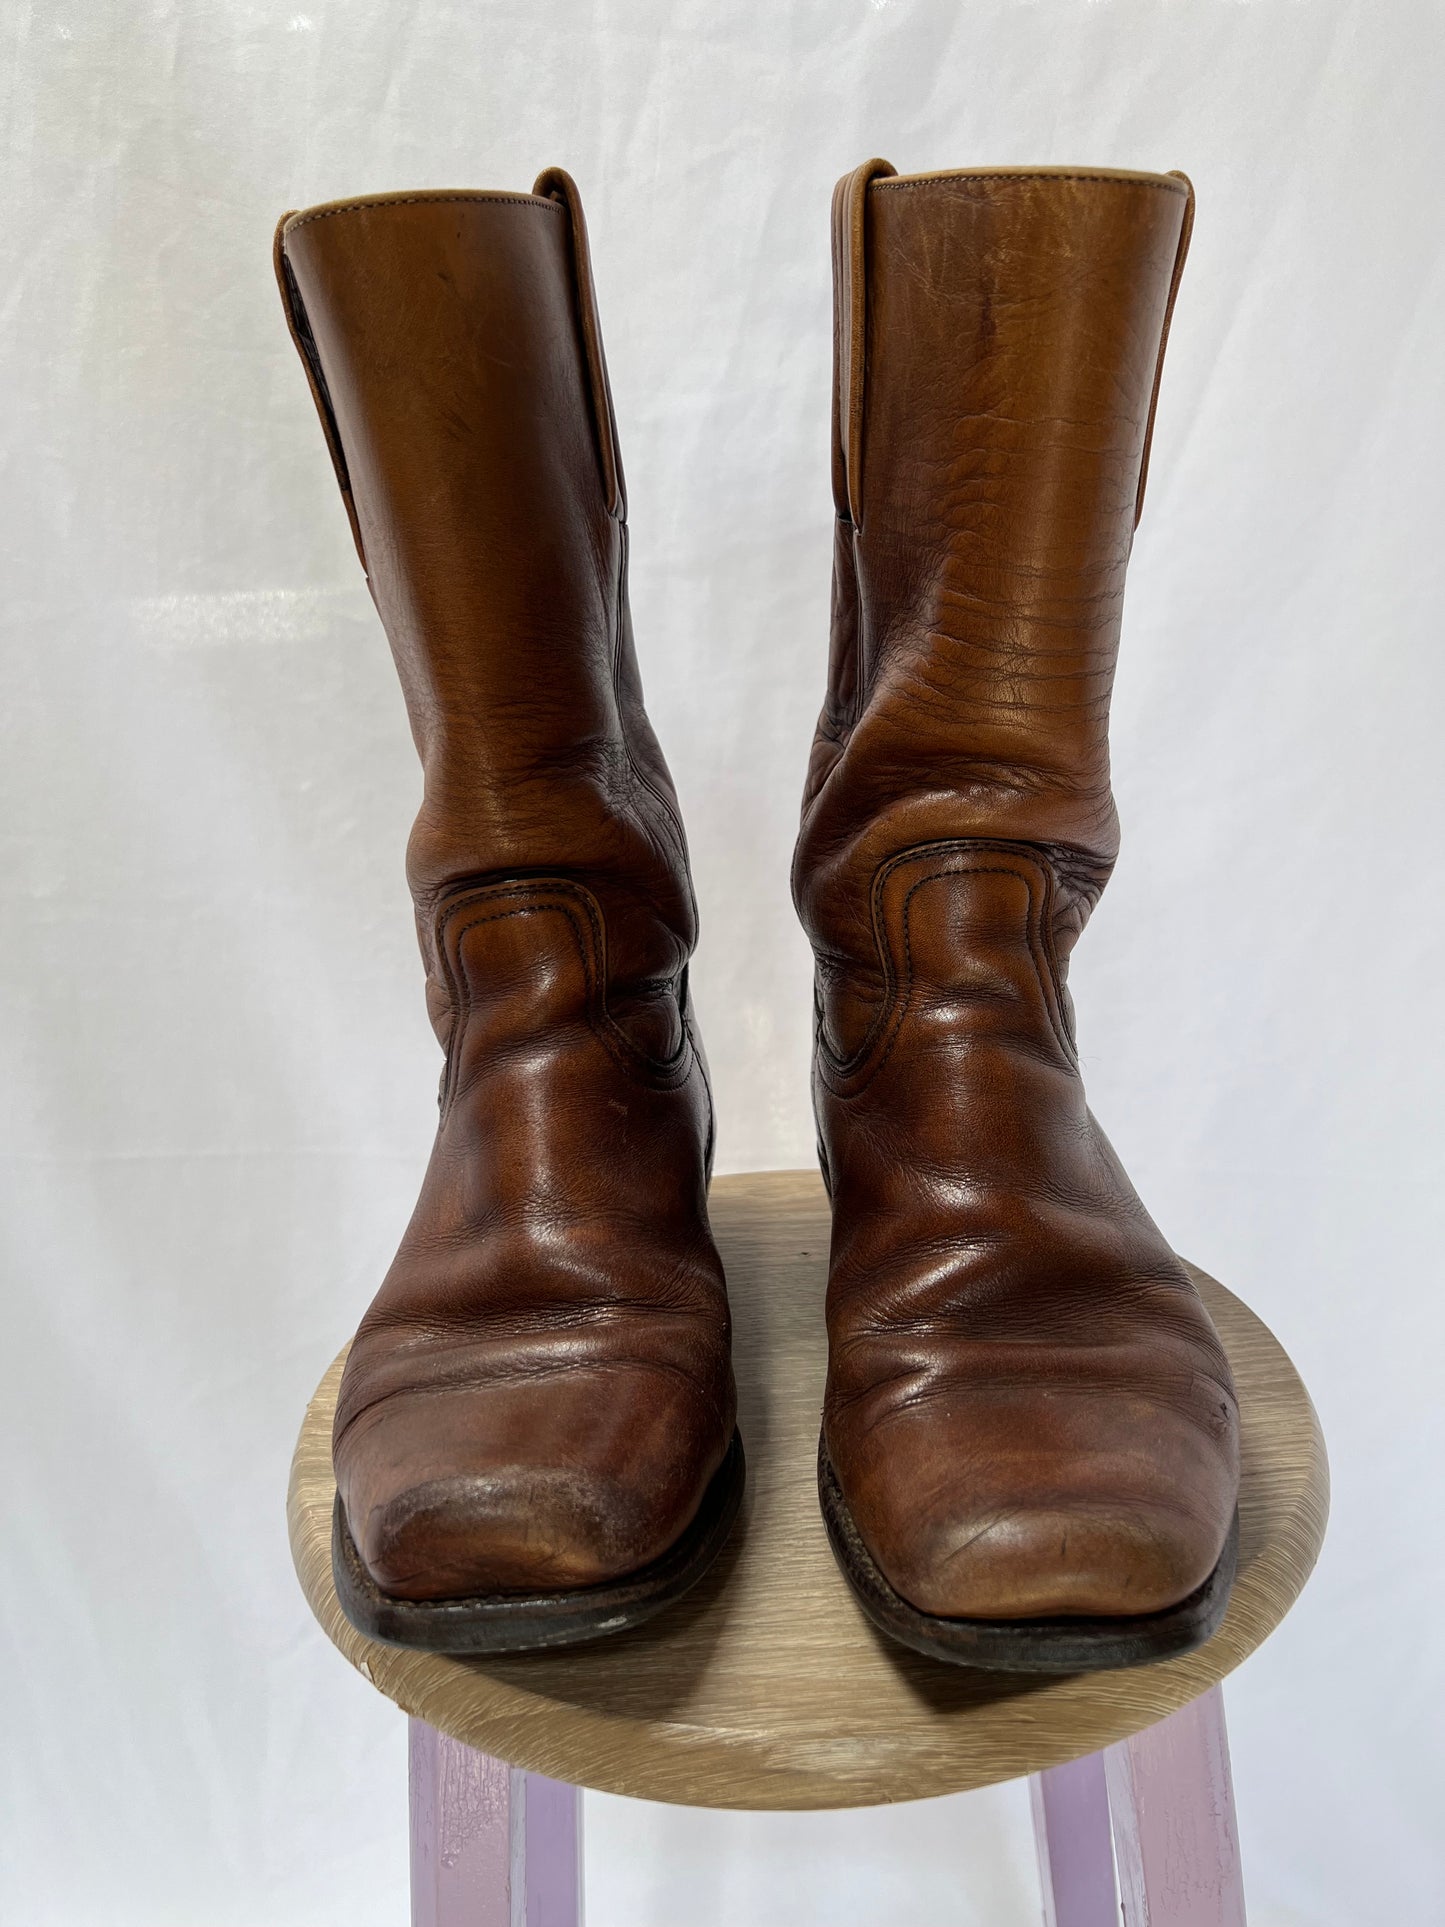 Vintage Frye Leather Boots - 8.5/9